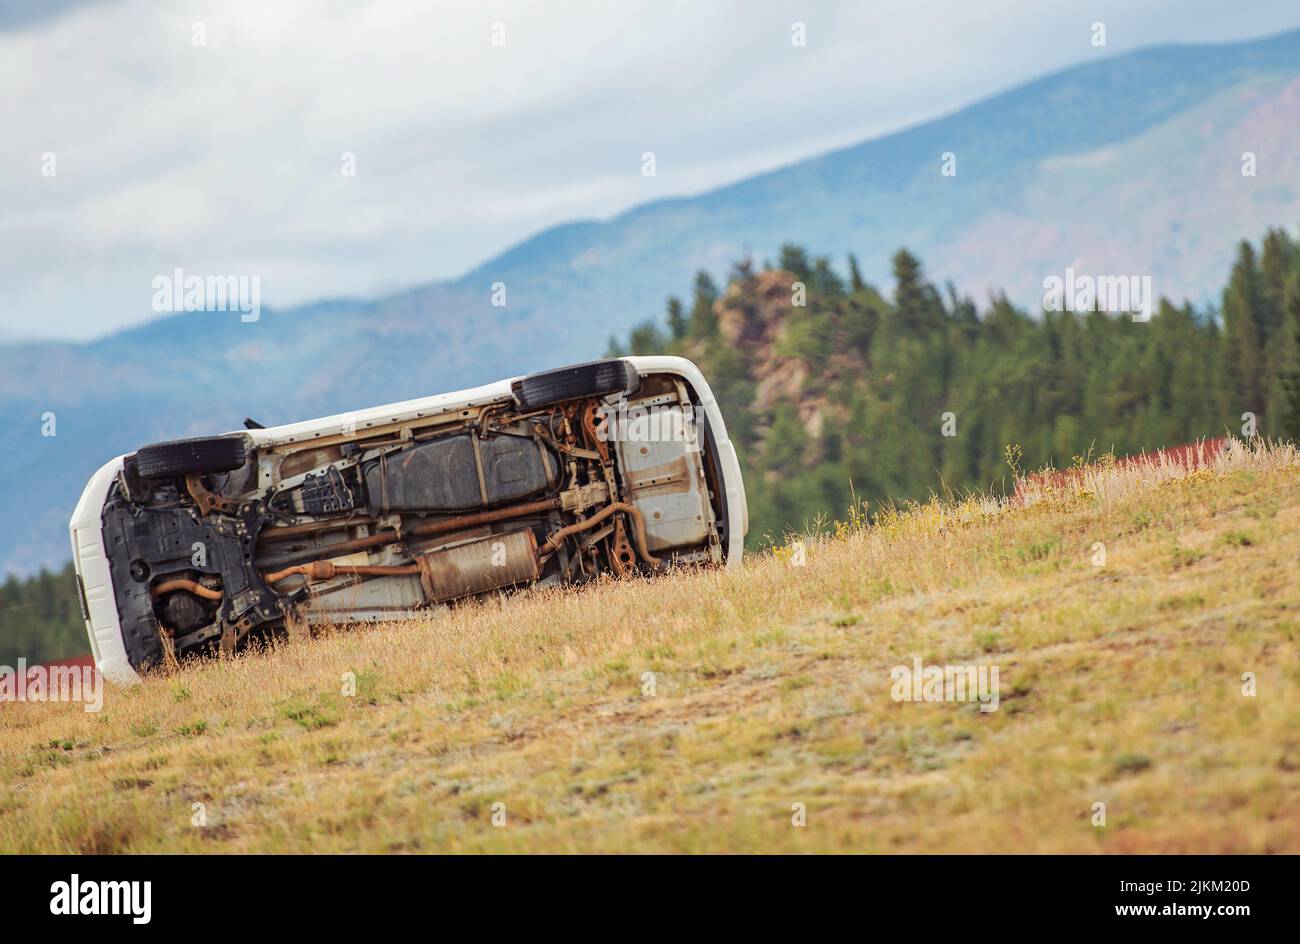 Crash Involved Rollover Car Out of Highway Laying on a Side Between Grasses. Stock Photo